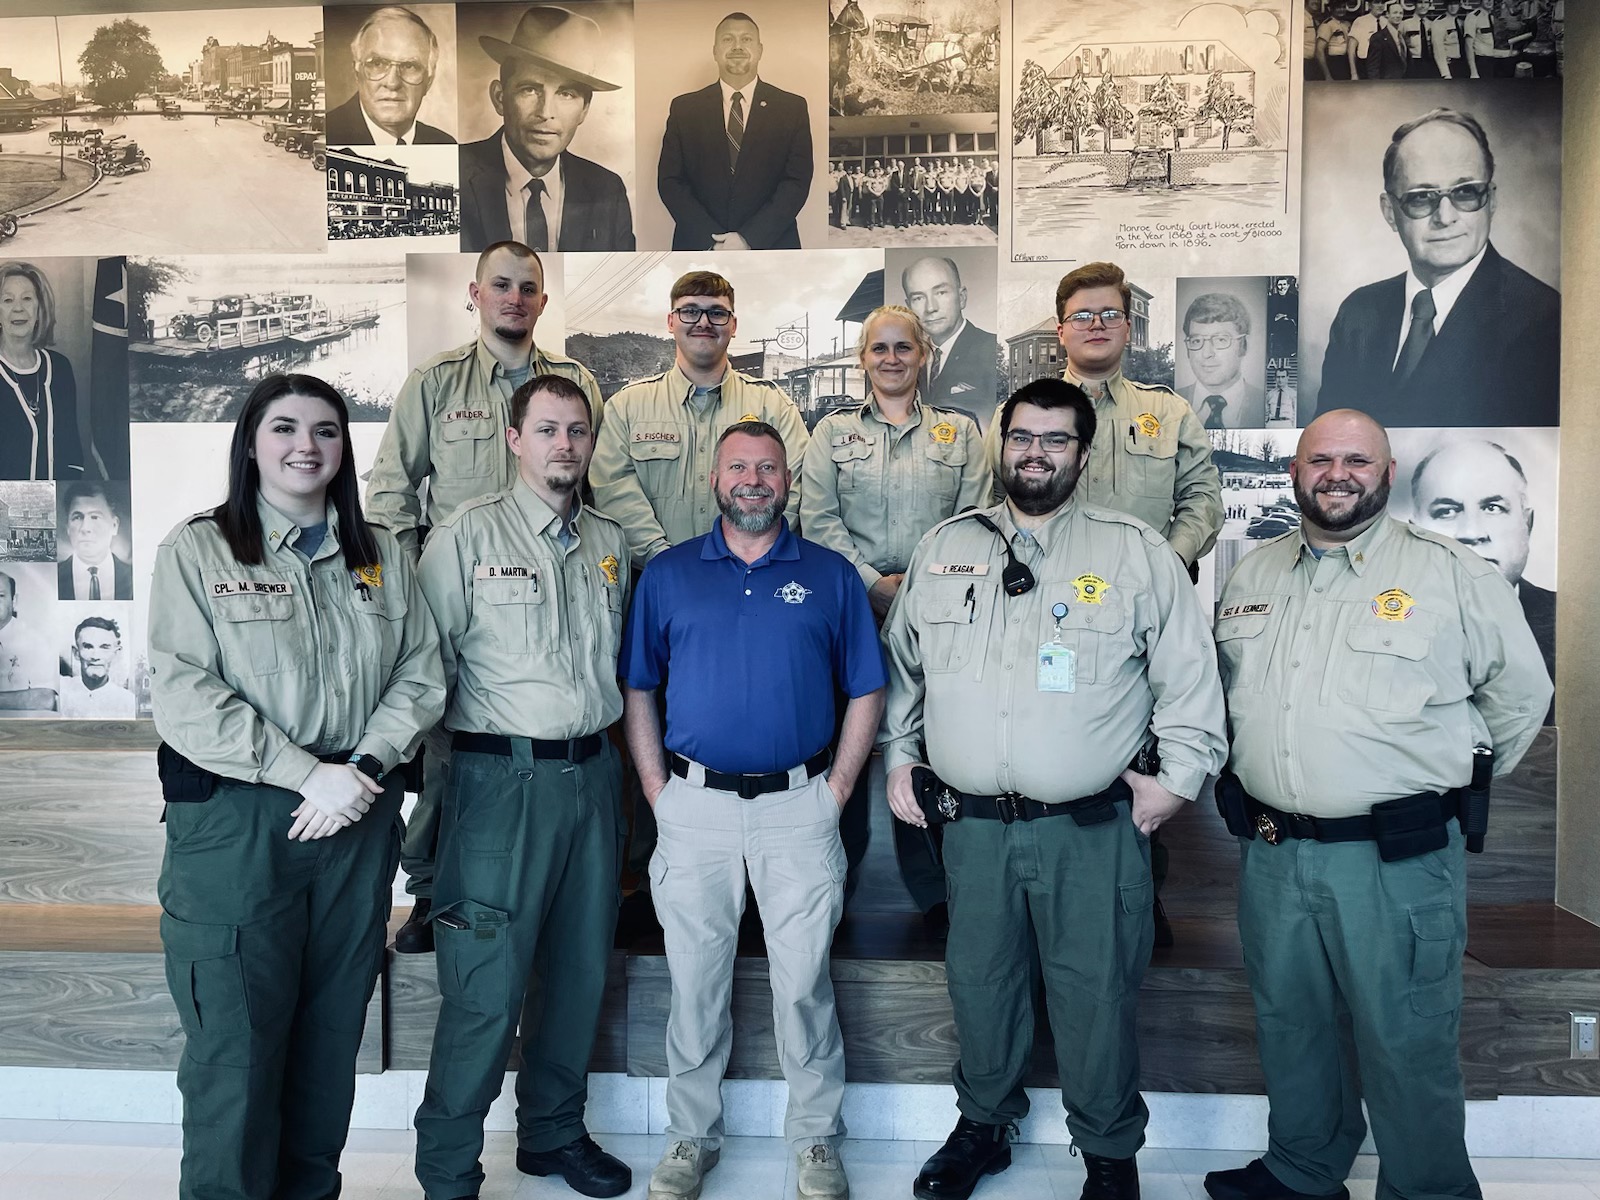 Corrections Officers with Sheriff 2